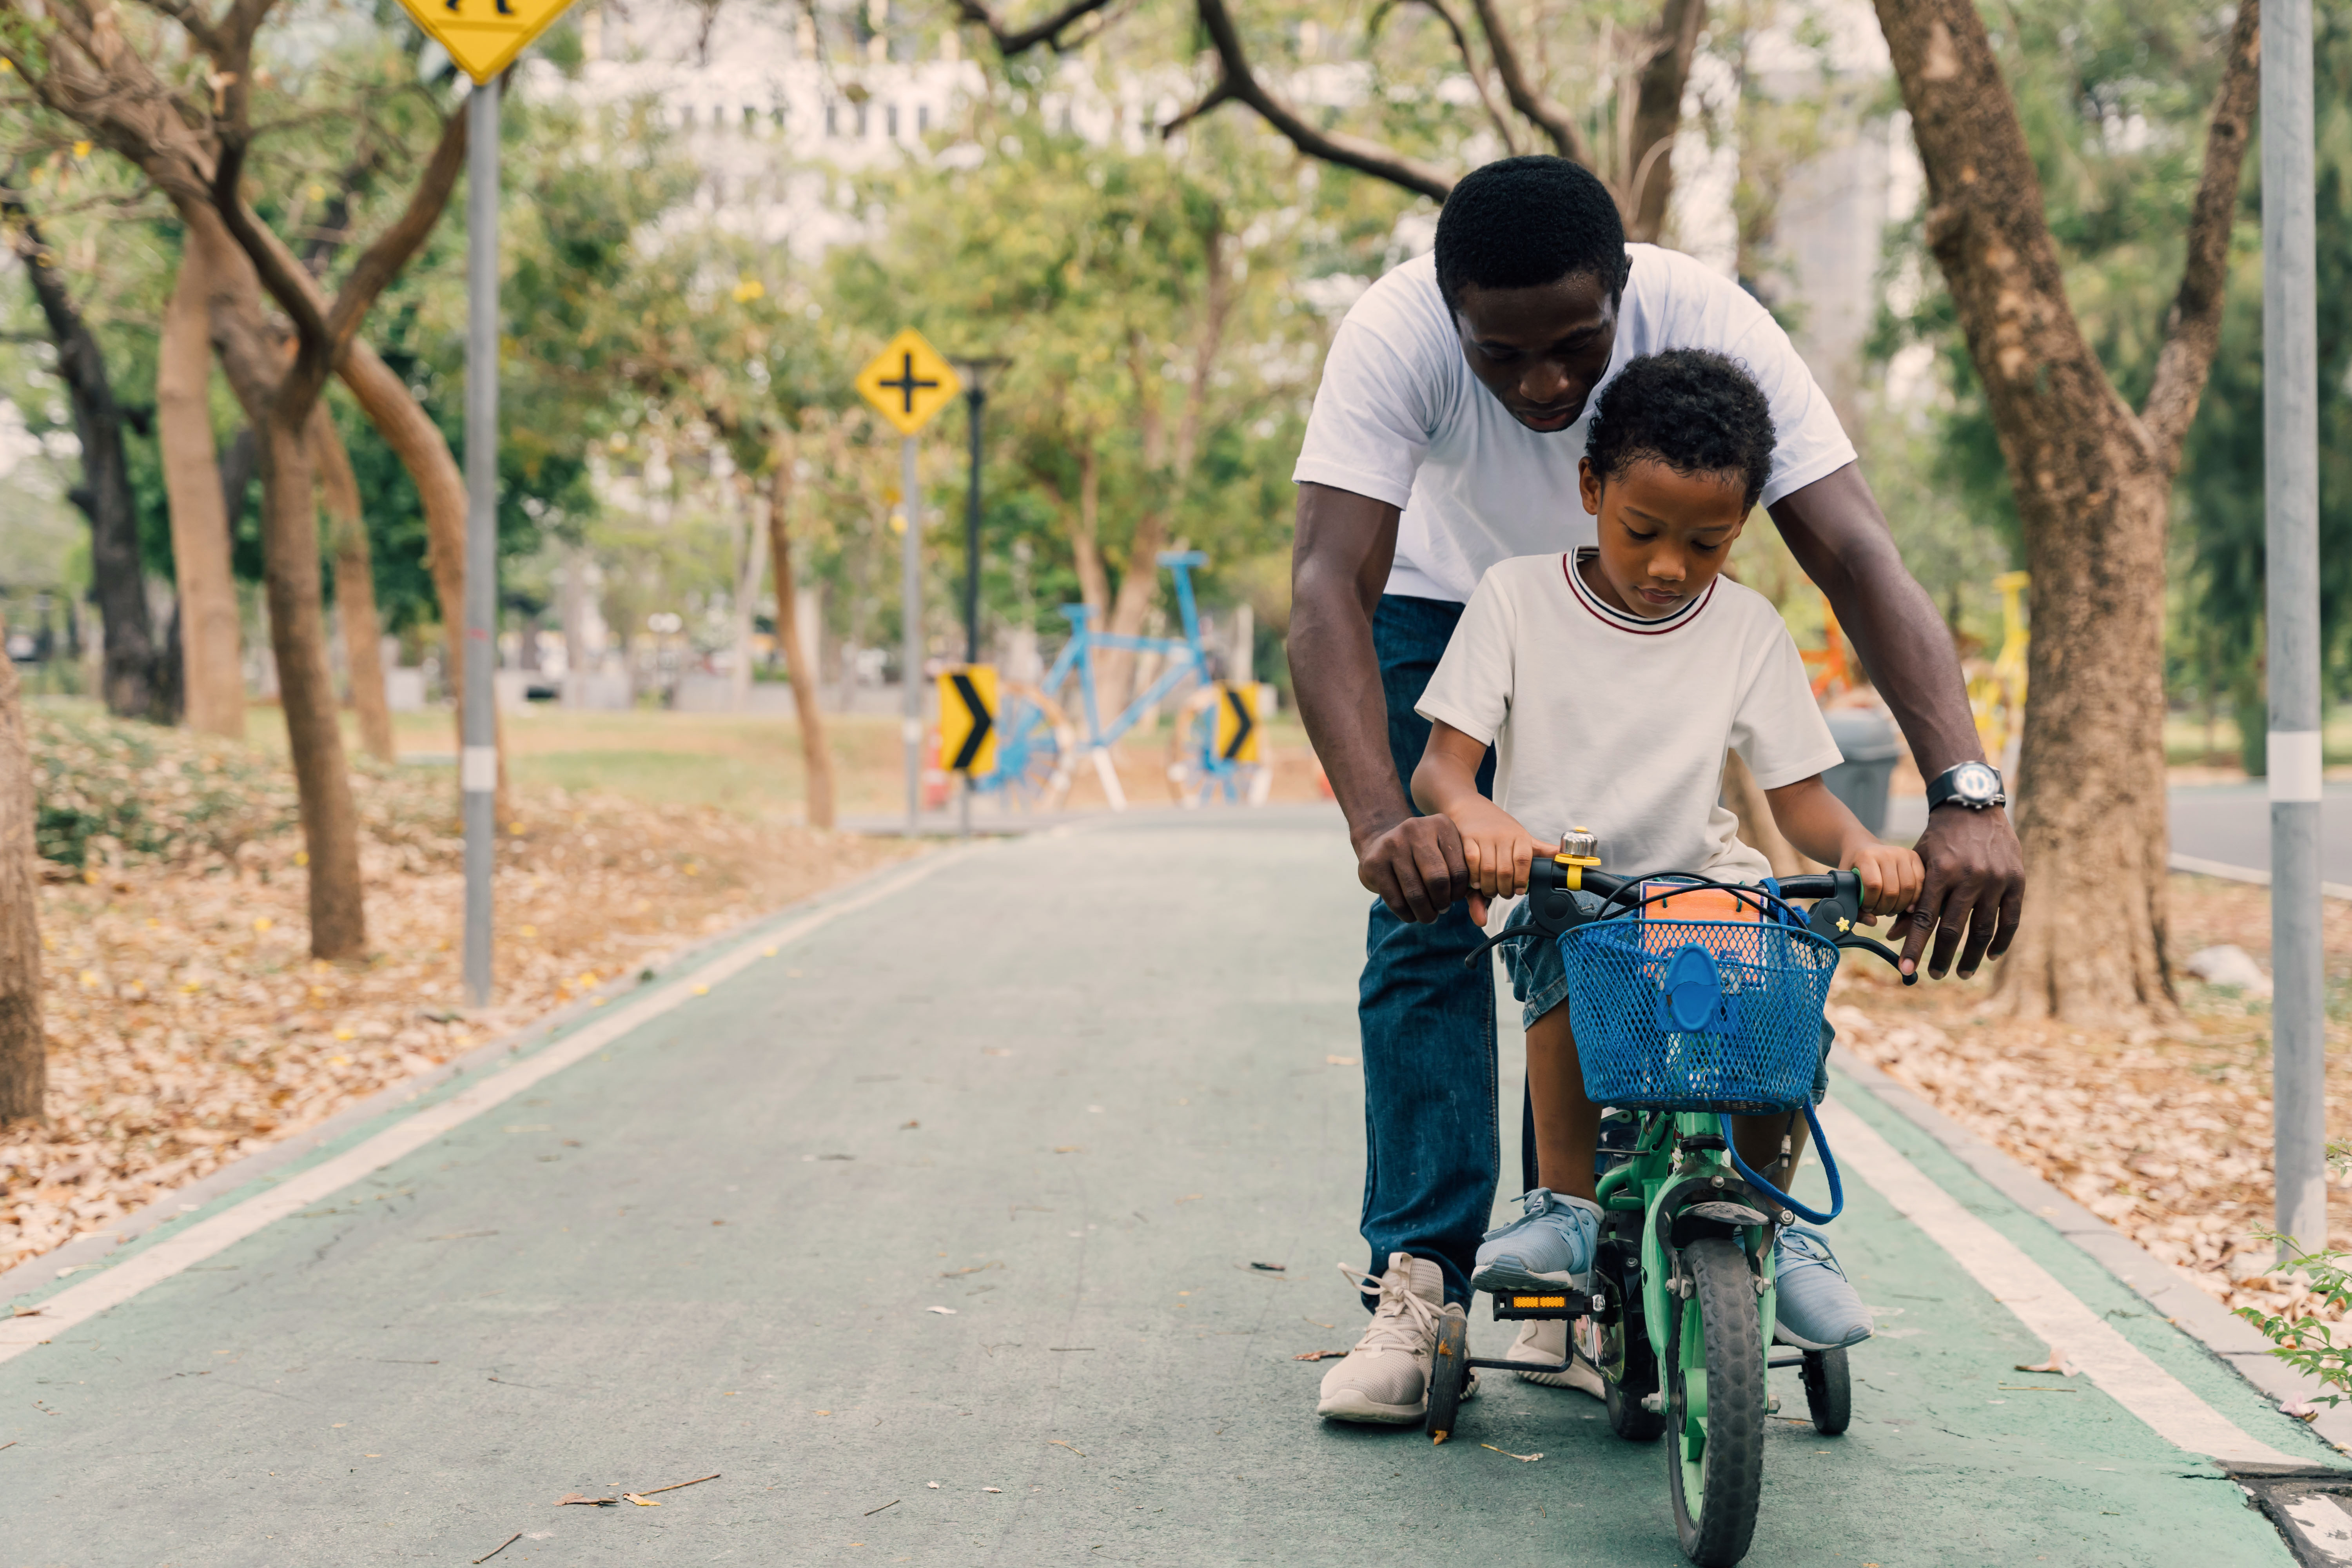 A father helping his son ride his bike.